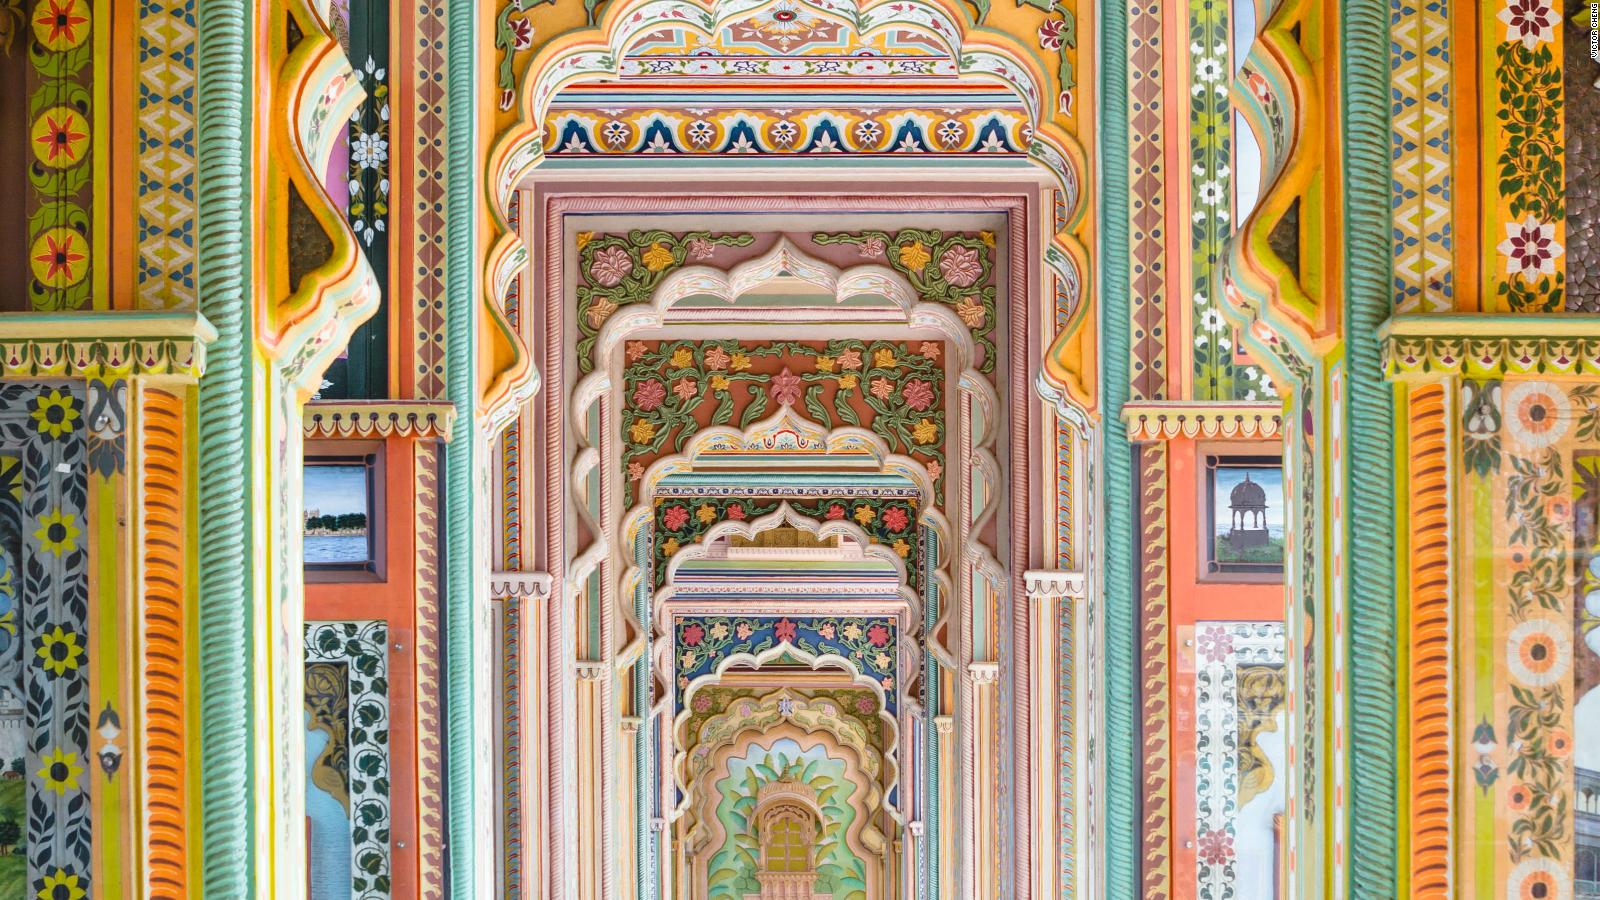 How About A Weekend Trip To Jaipur - Explore The Pink City In 2 days!